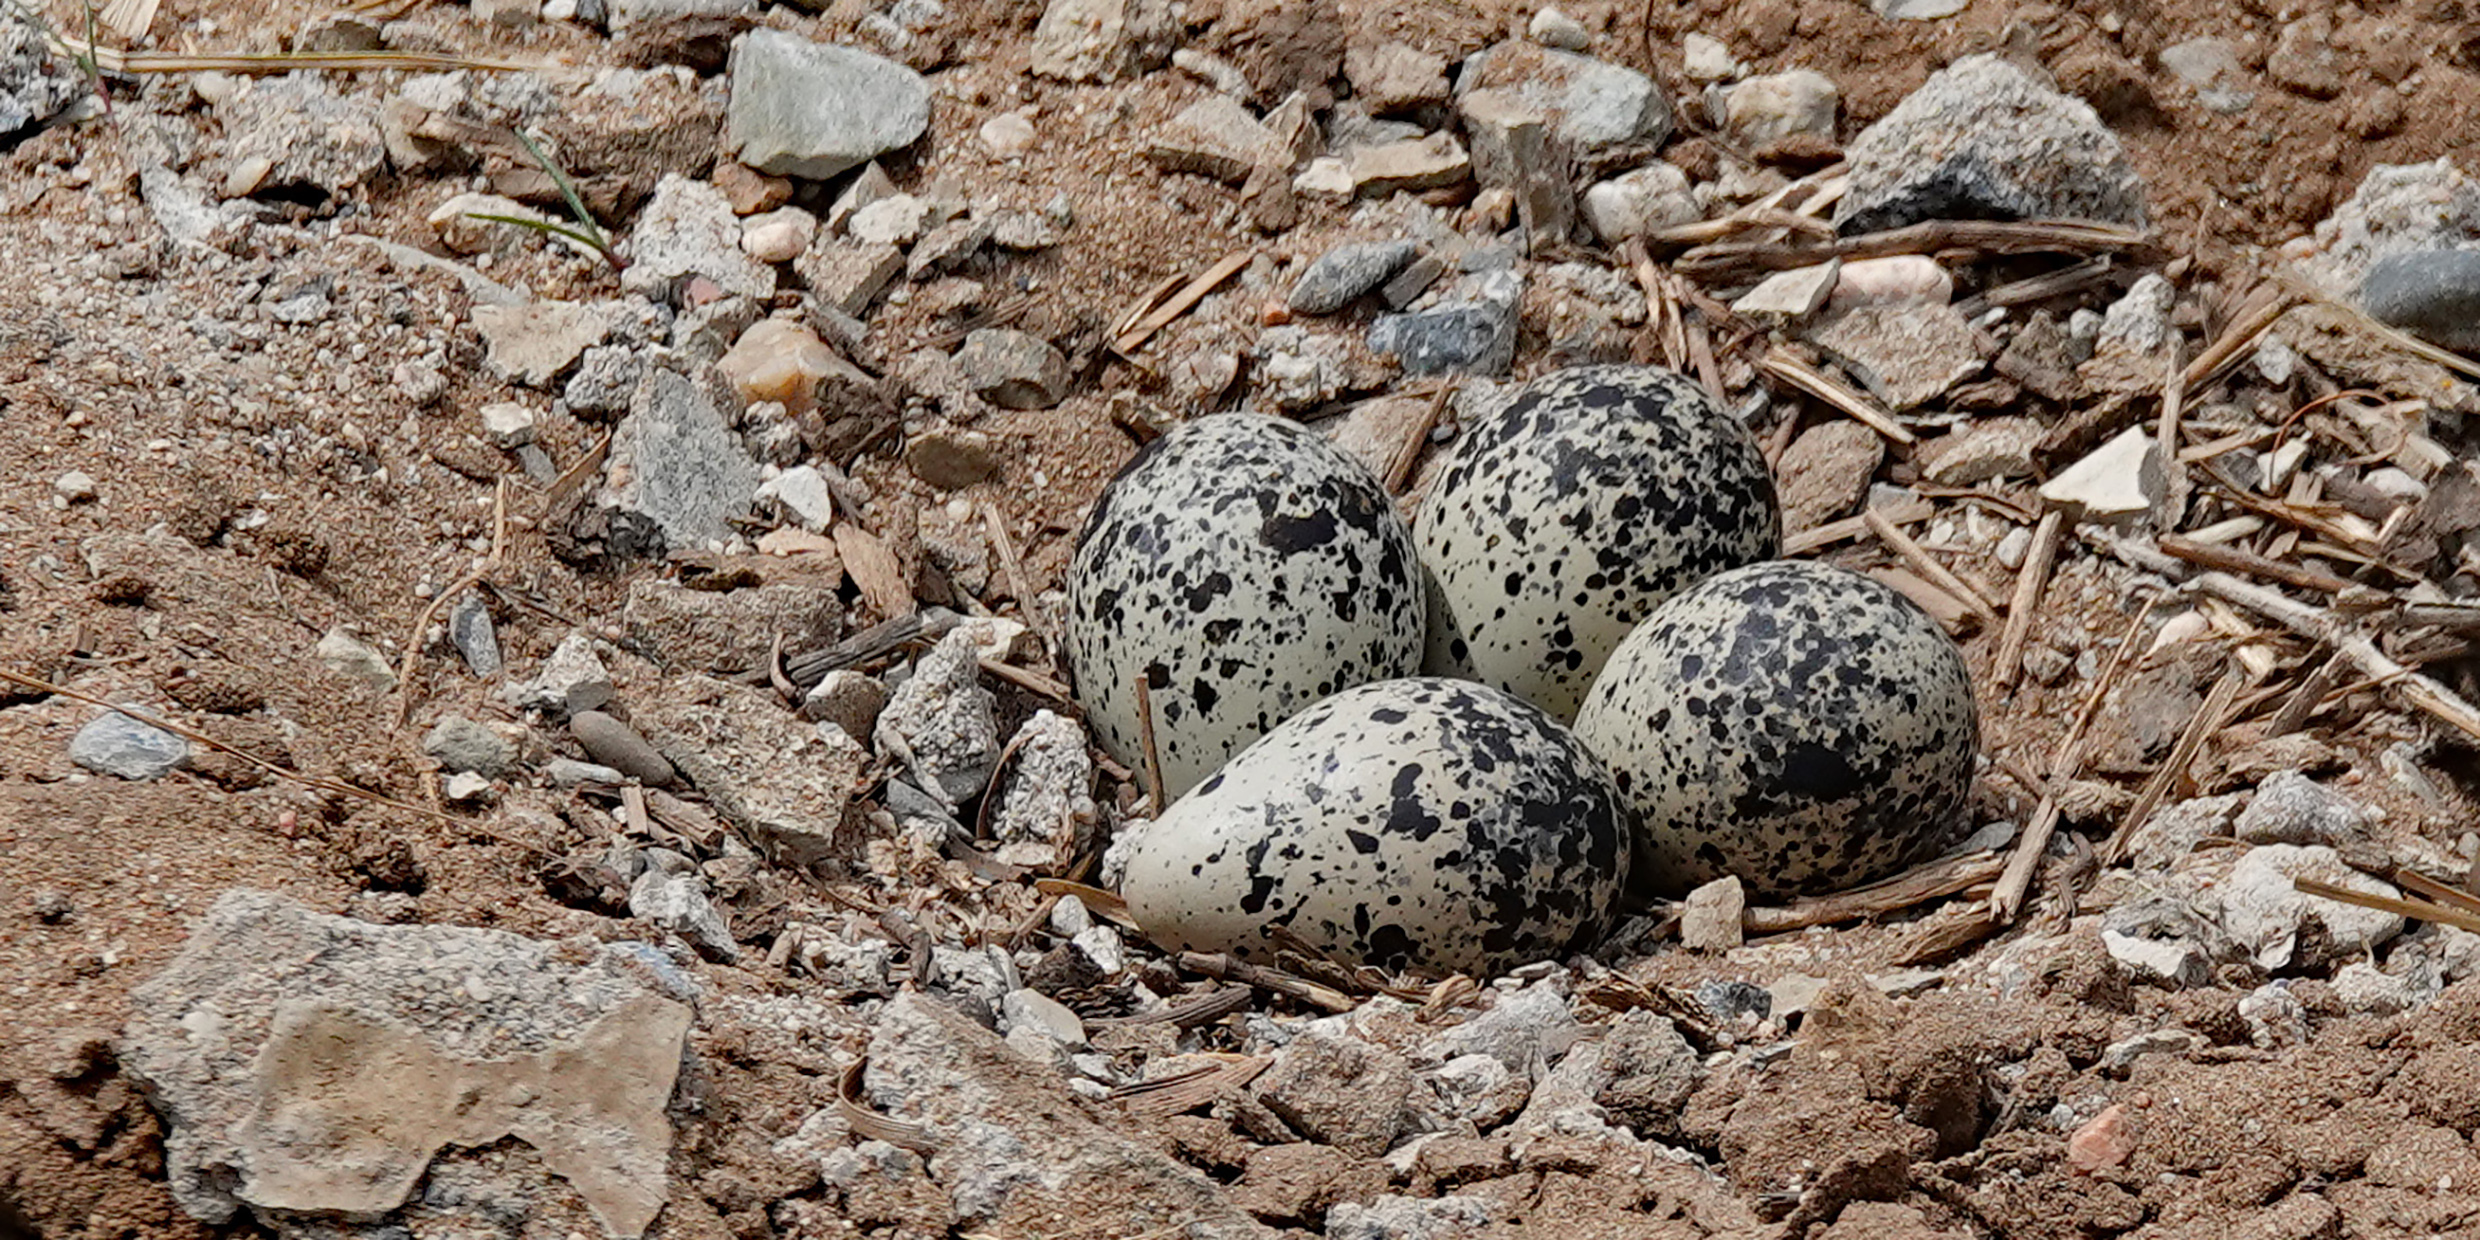 Image of four speckled eggs in a nest on the ground